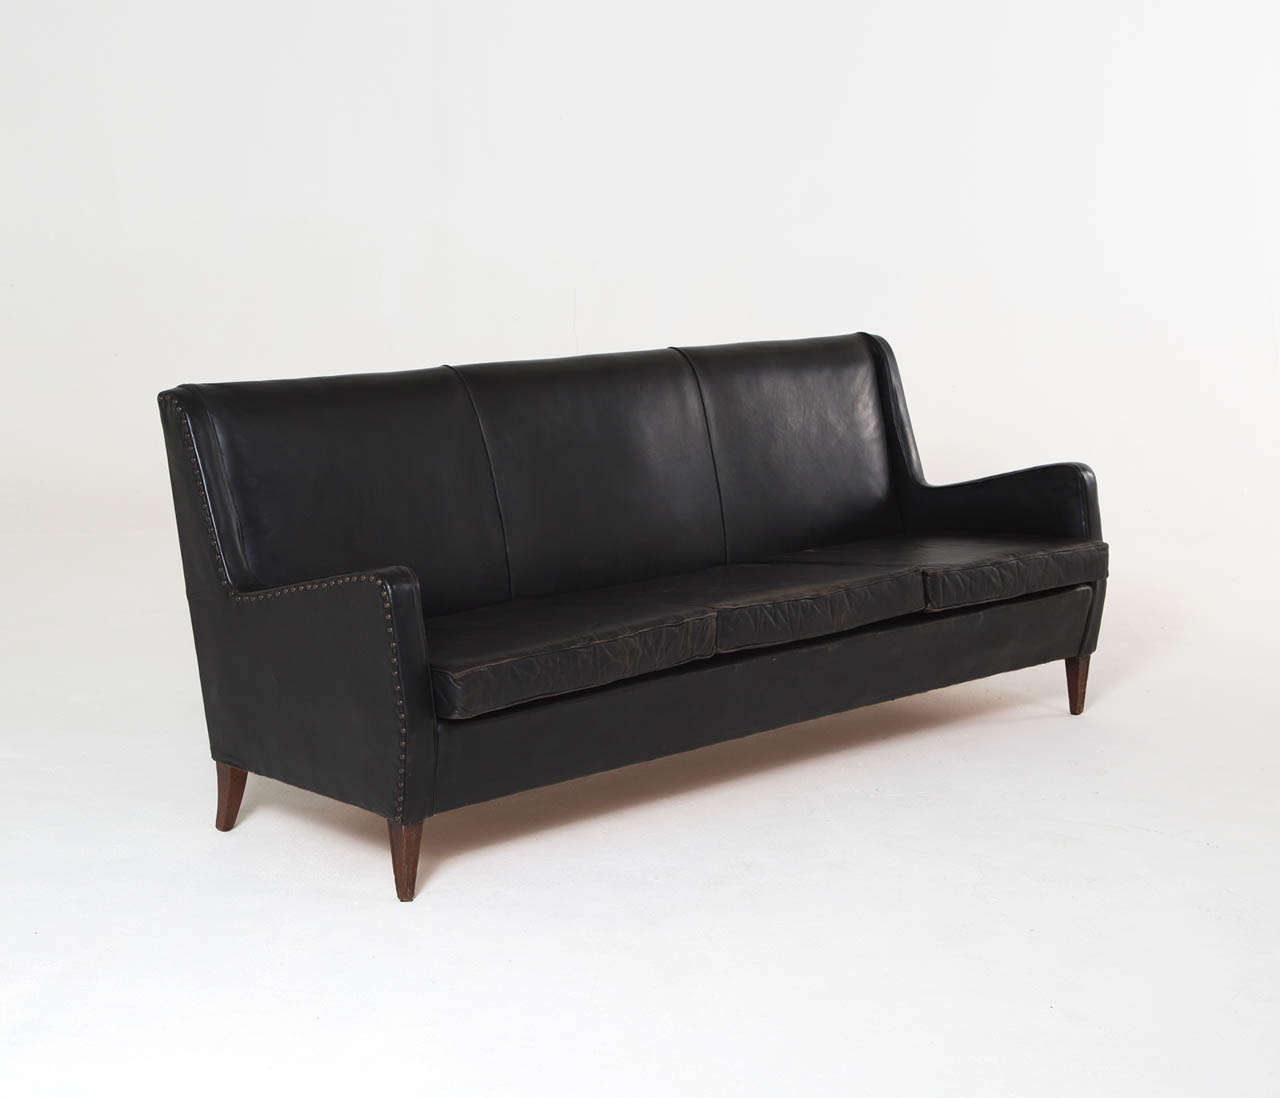 An elegant designed three-seater sofa in original leather with gorgeous patina and brass nails in the style of Frits Henningsen, Denmark circa 1950. The legs are made of dark stained oak. 

Completely original and checked on every single detail to